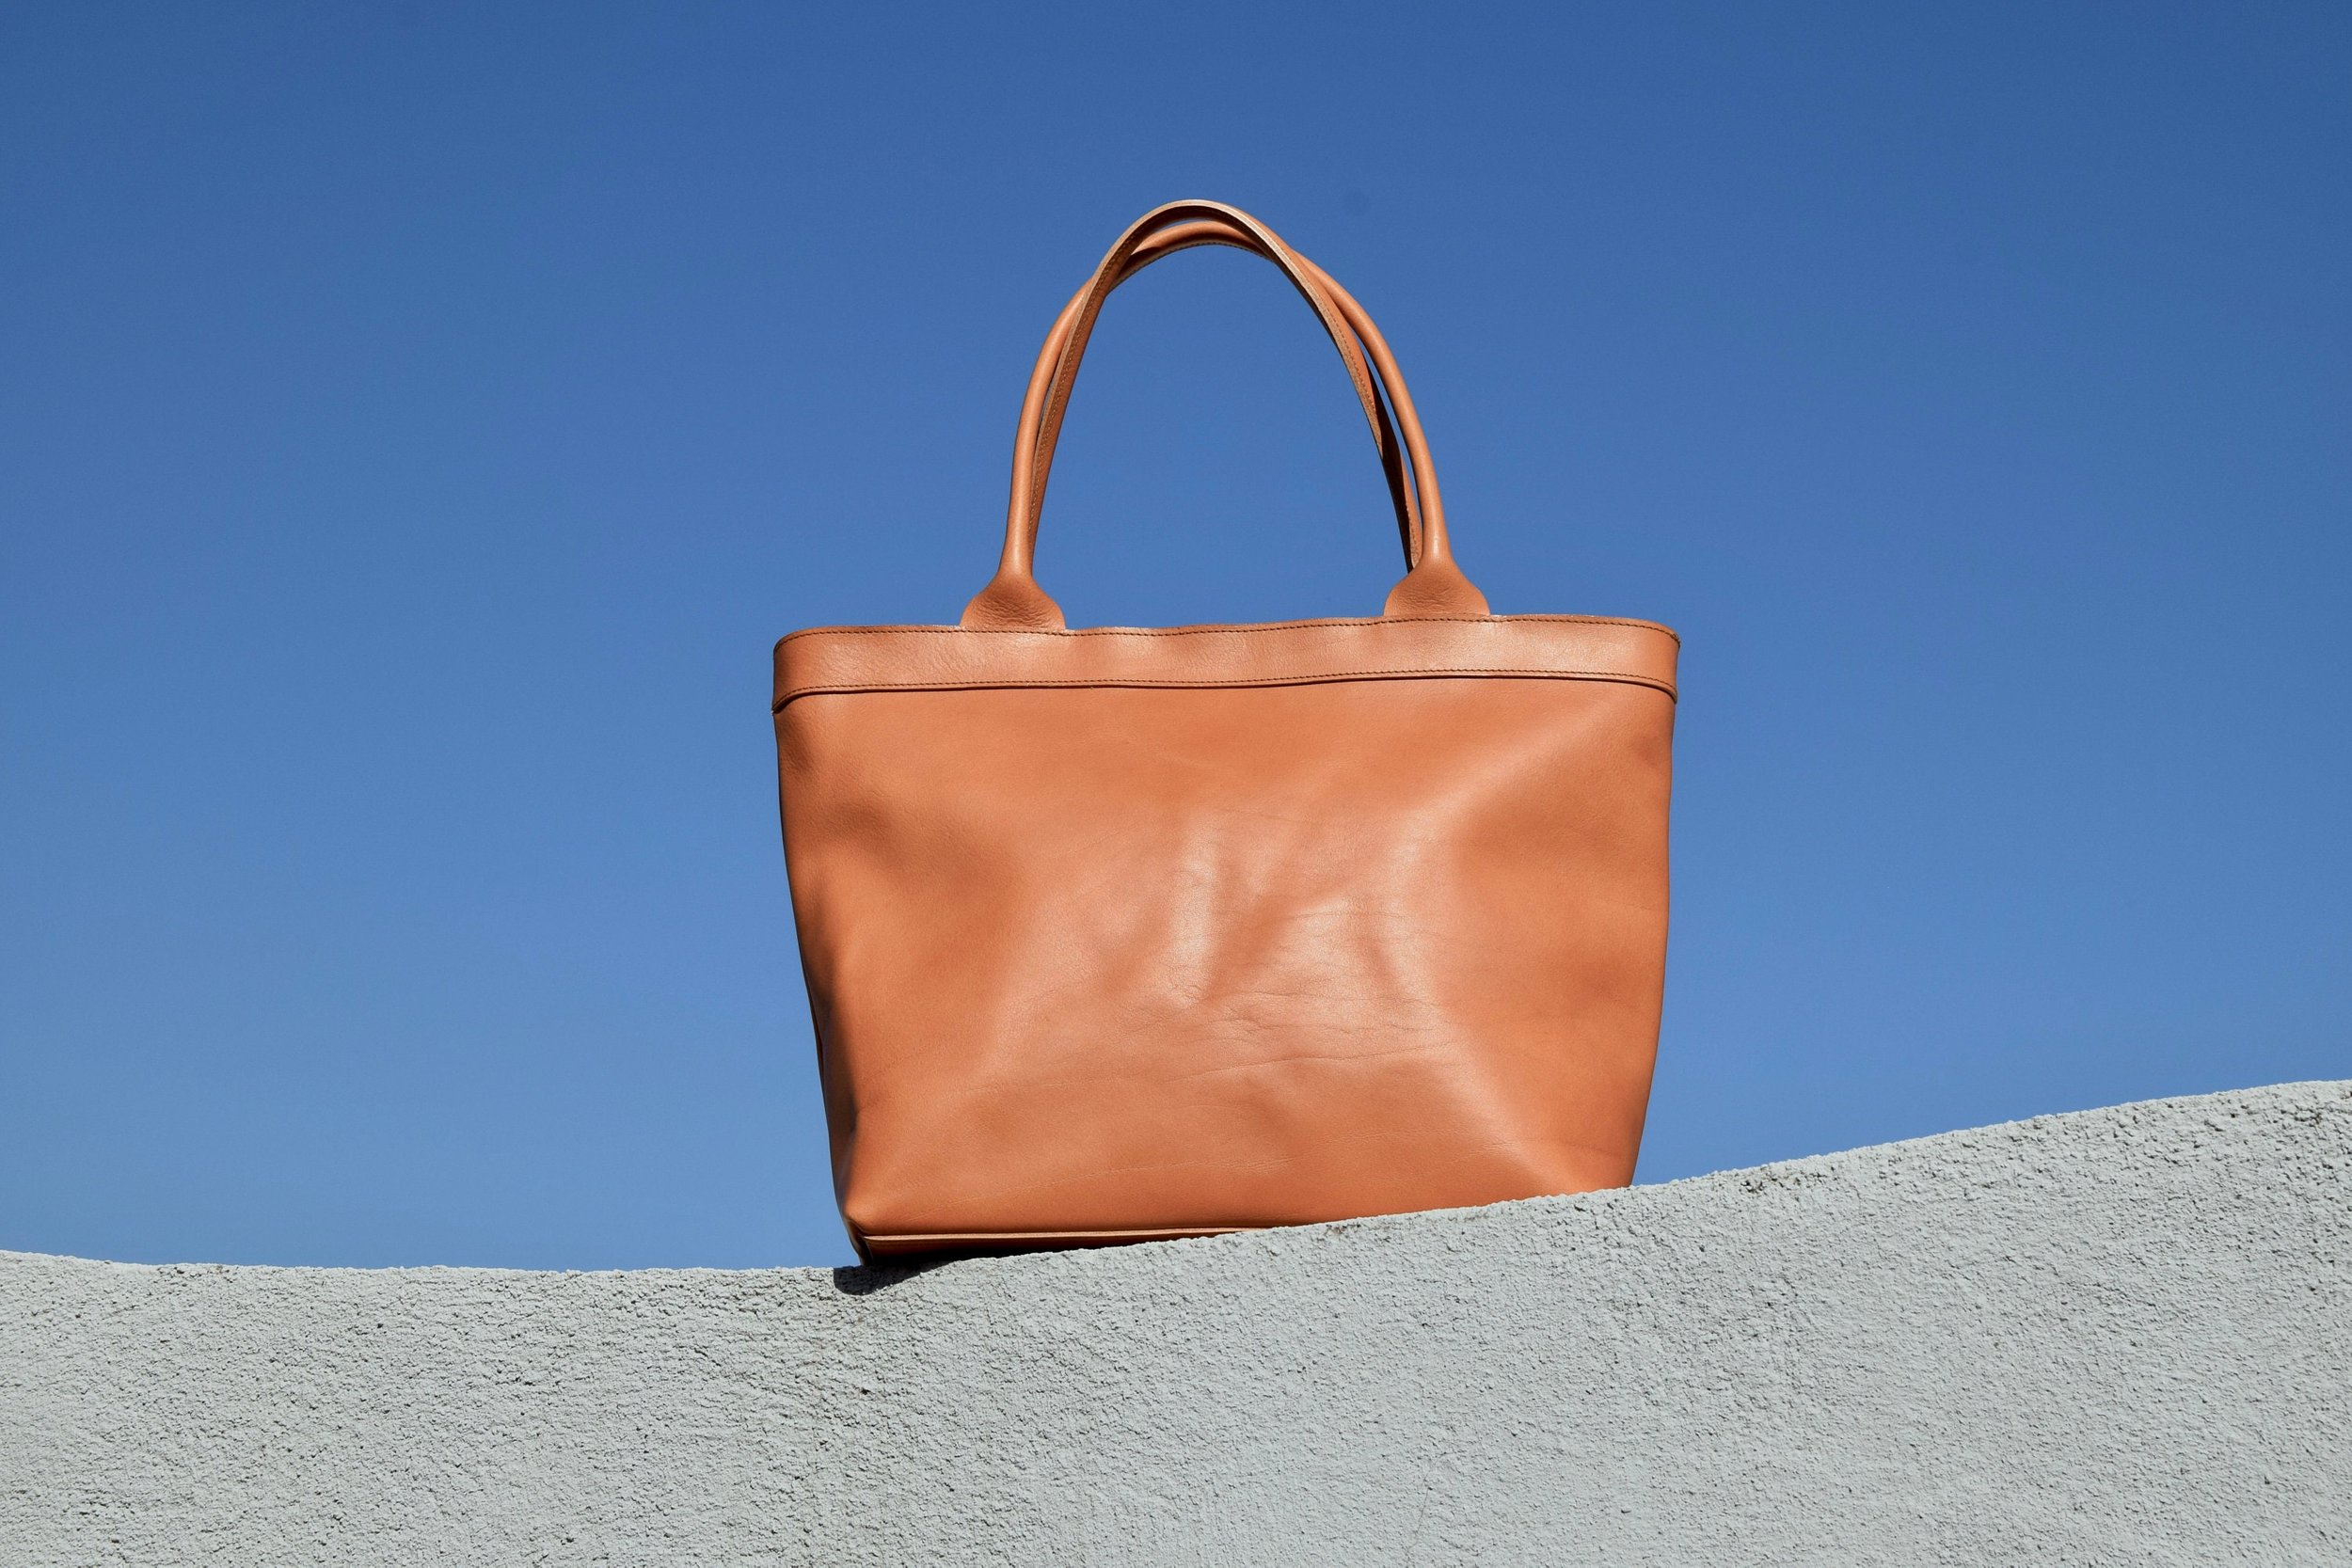 Light brown leather bag with zipper and inside lining — Vermut Atelier